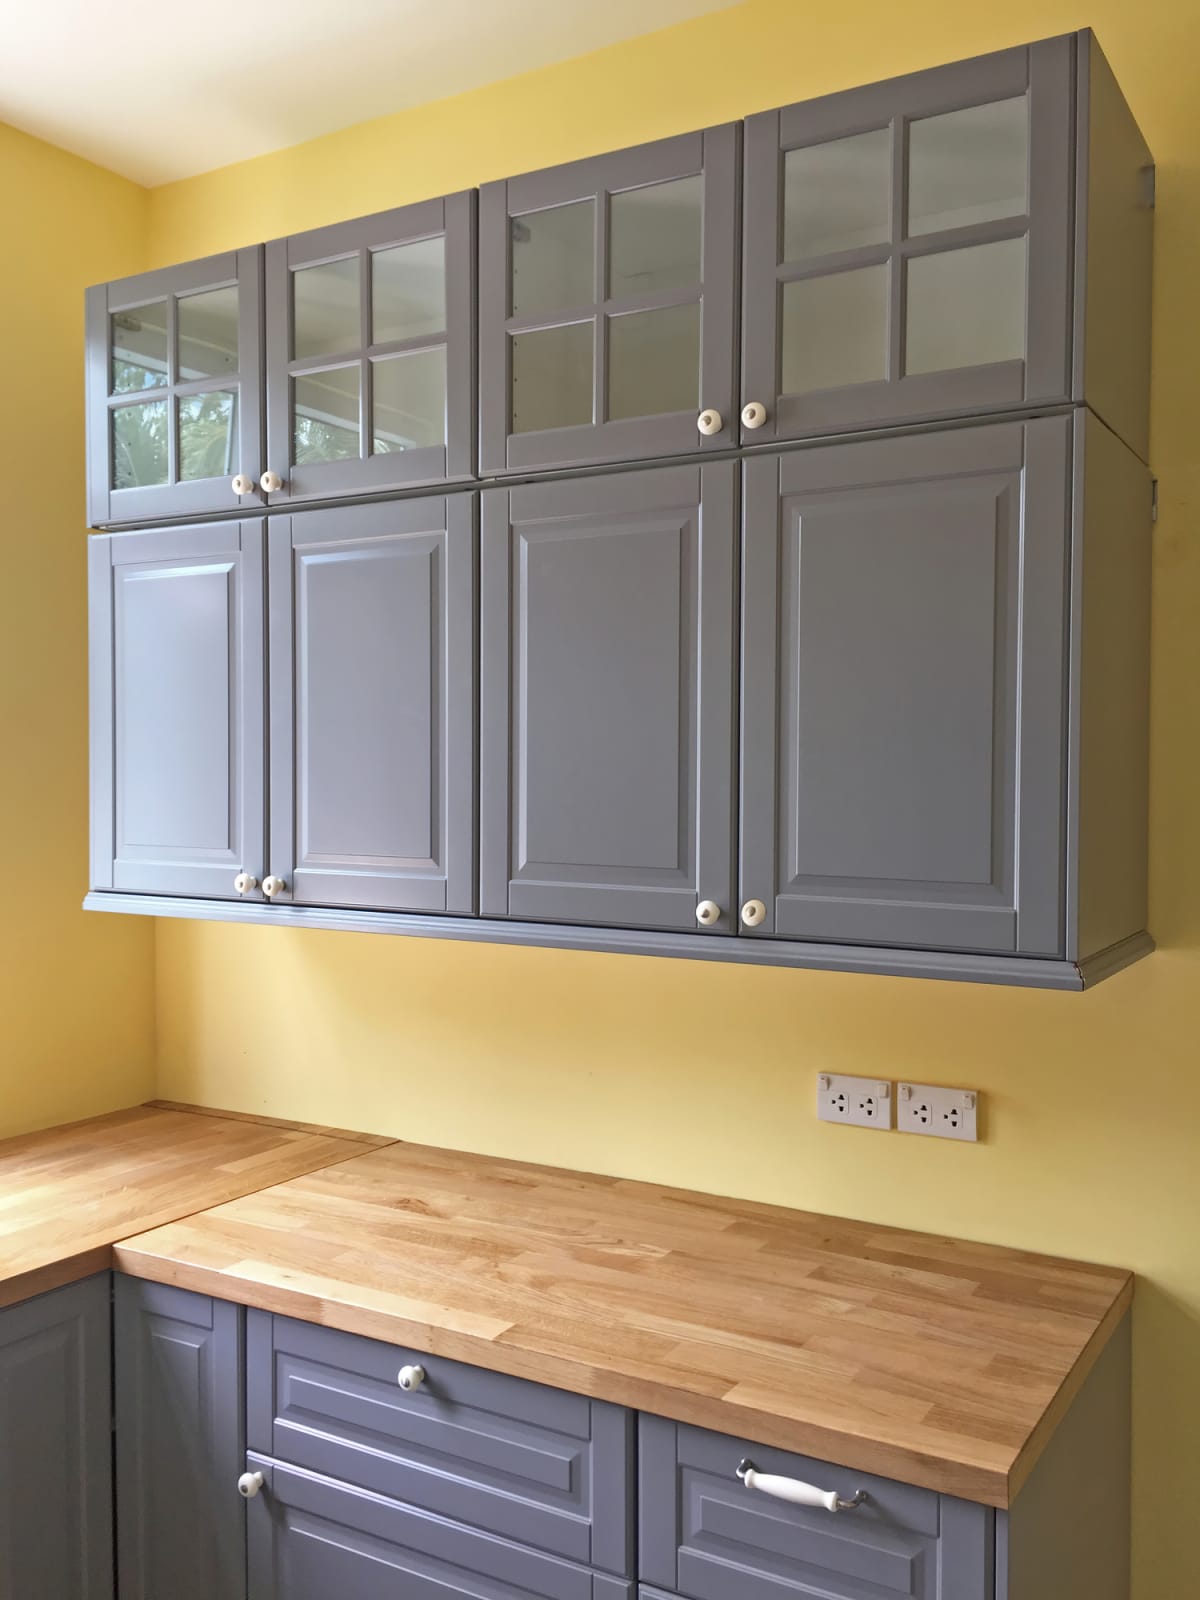 A kitchen with grey cabinets and drawers.